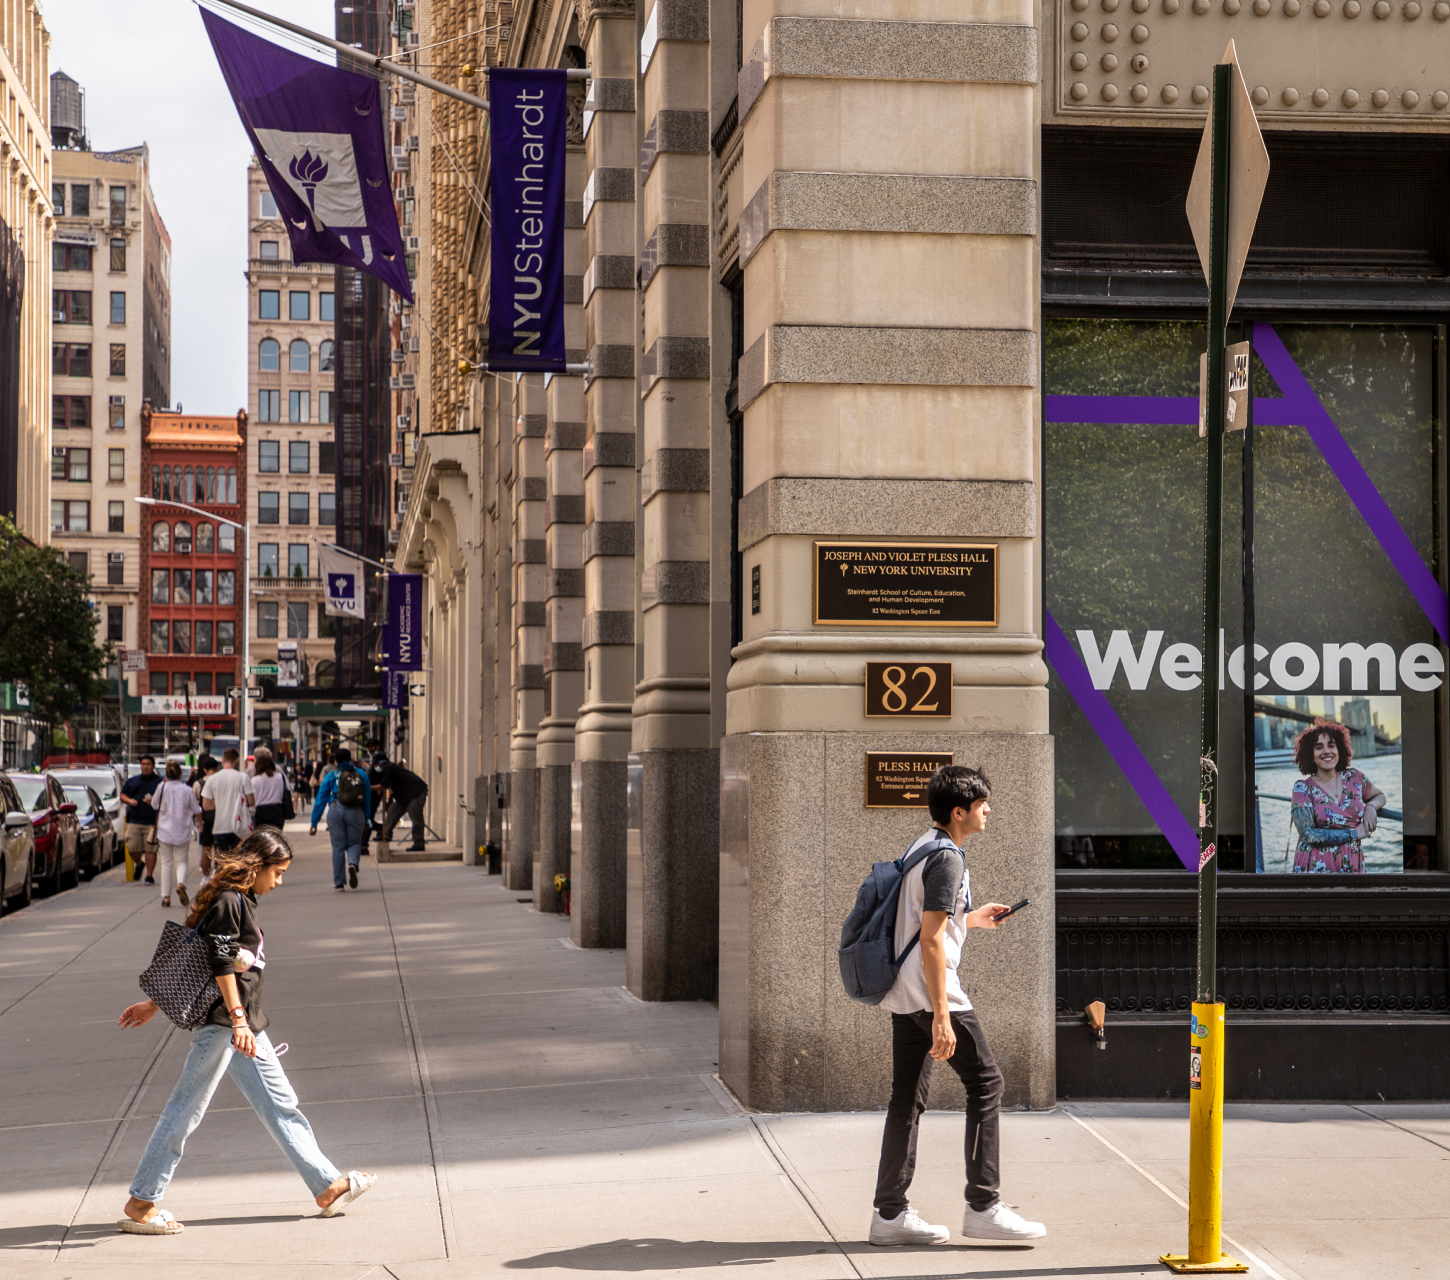 NYU students passing through campus in New York City.